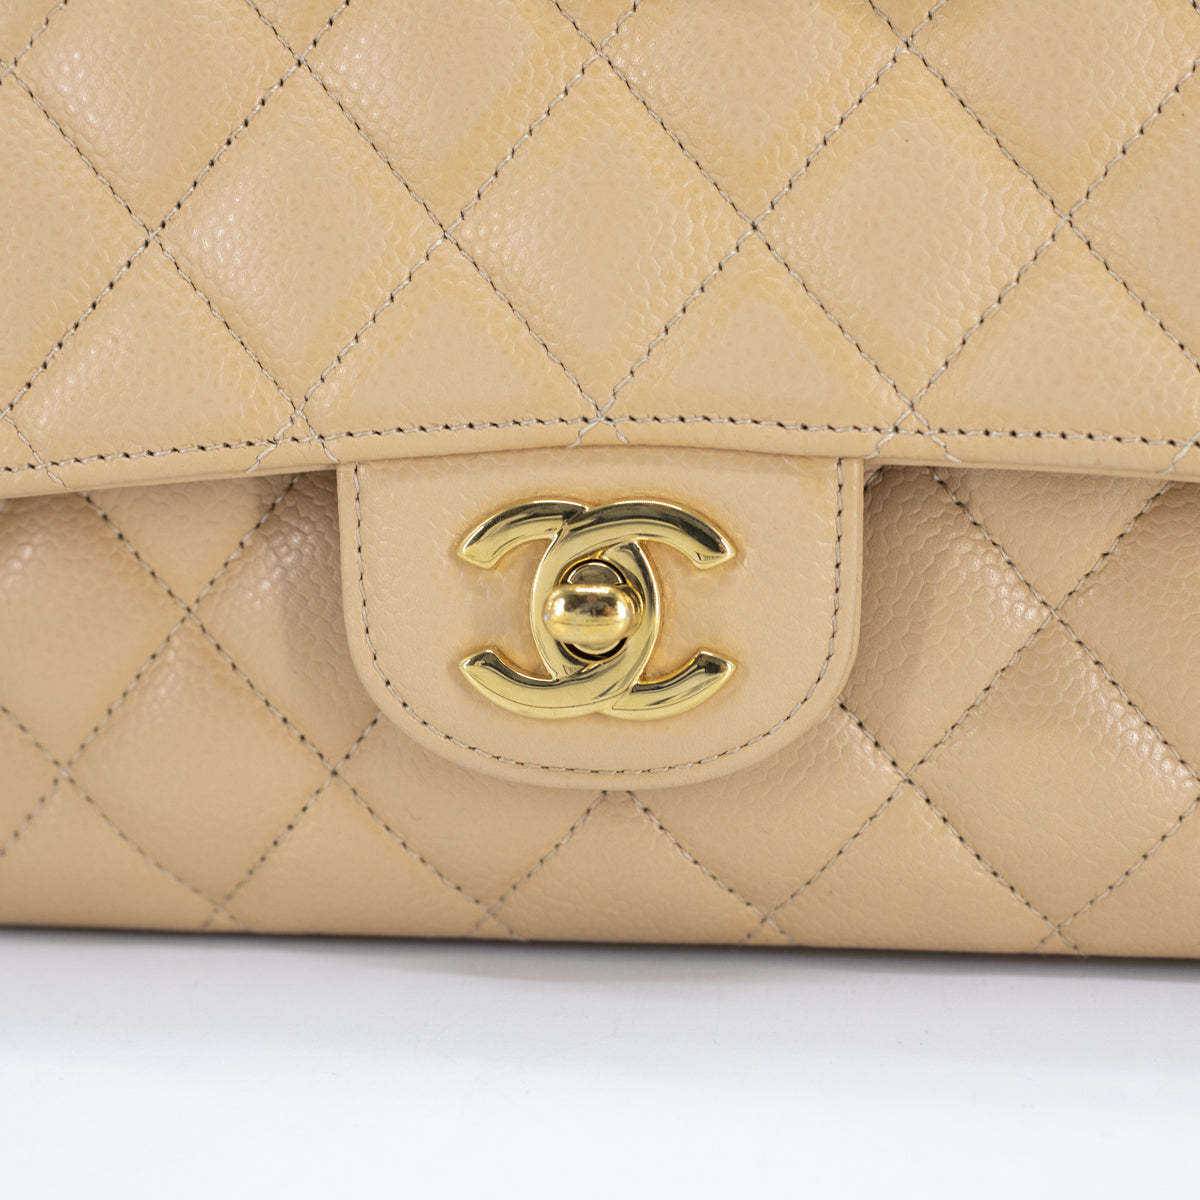 CHANEL Beige Clair Caviar Small Classic Flap Bag Gold Hardware New   AYAINLOVE CURATED LUXURIES